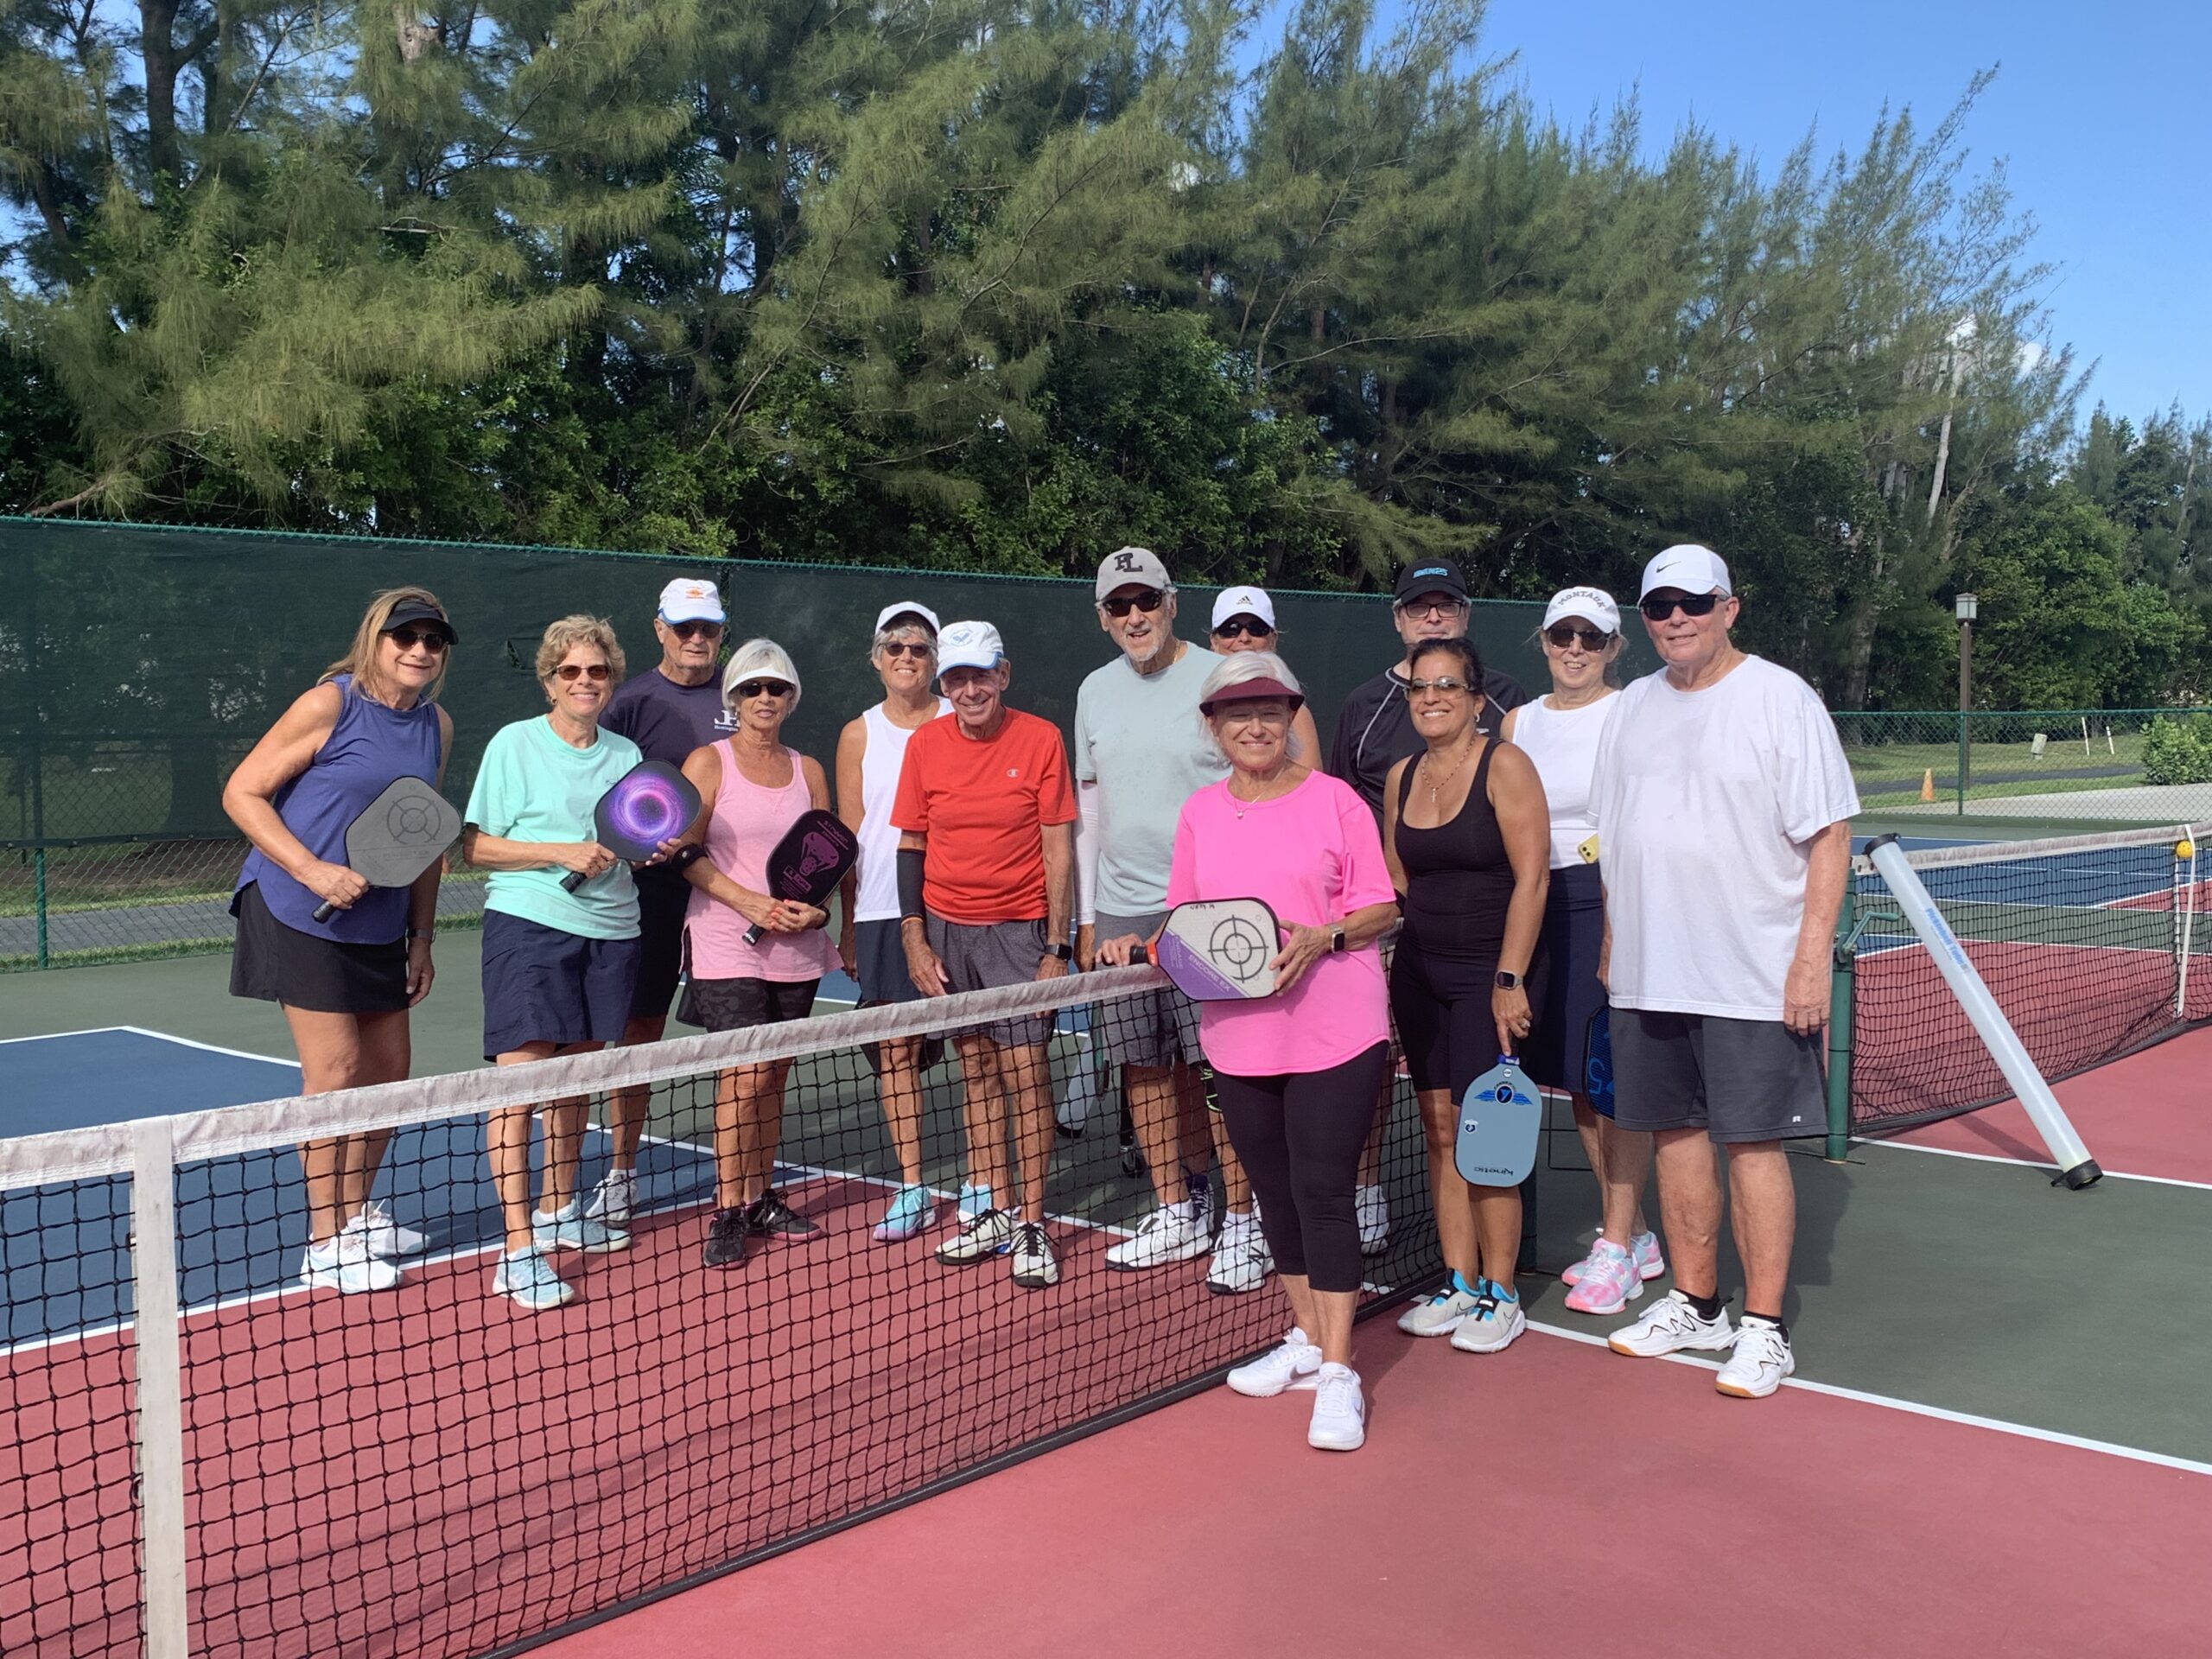 Two more successful intermediate pickleball clinics in Delray Beach, FL. with 25 avid pickleball players wanting to improve their game!